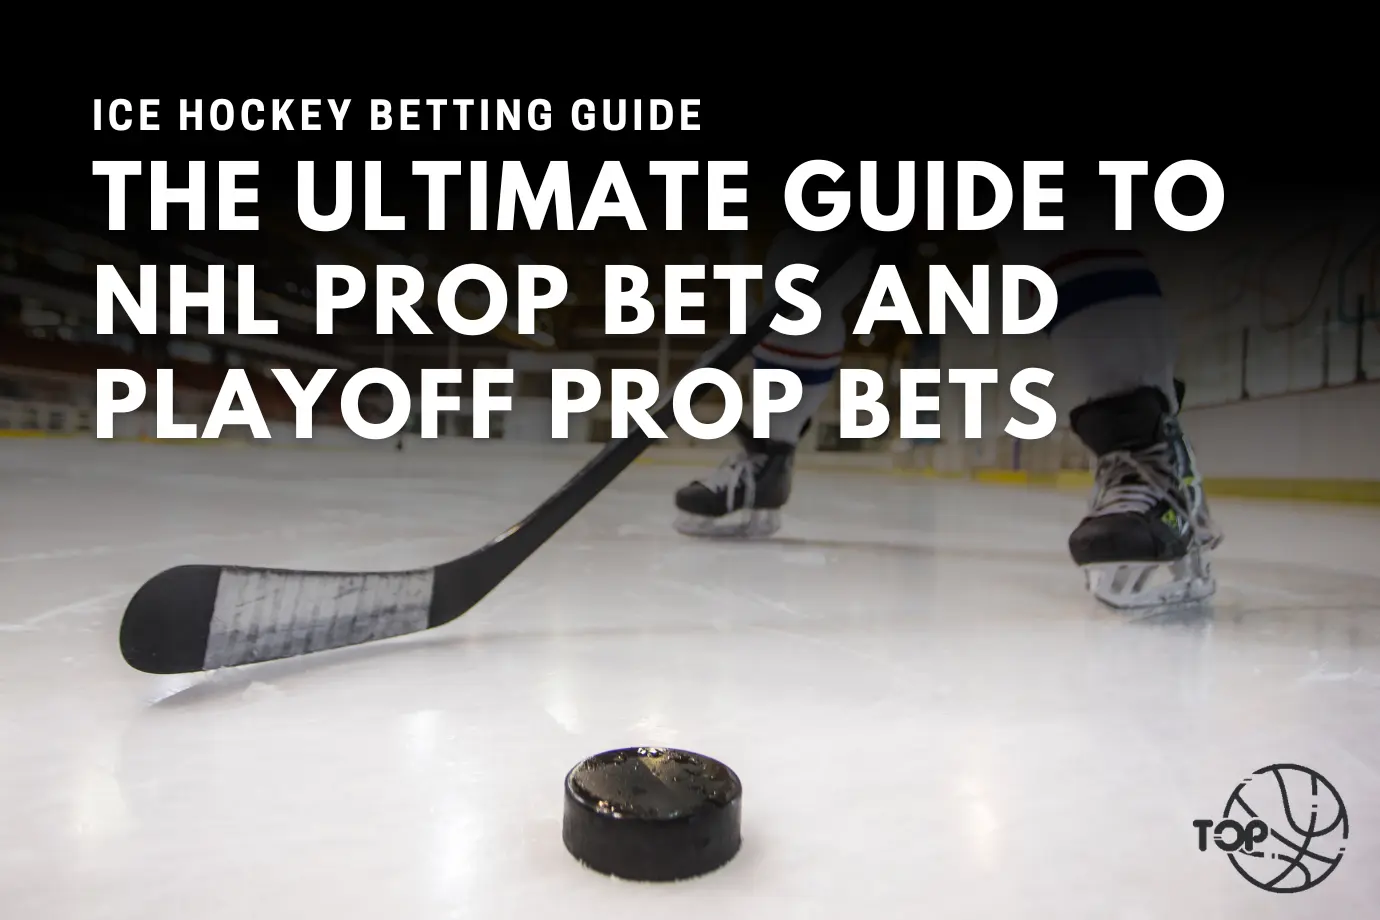 The Ultimate Guide to NHL Prop Bets and Playoff Prop Bets